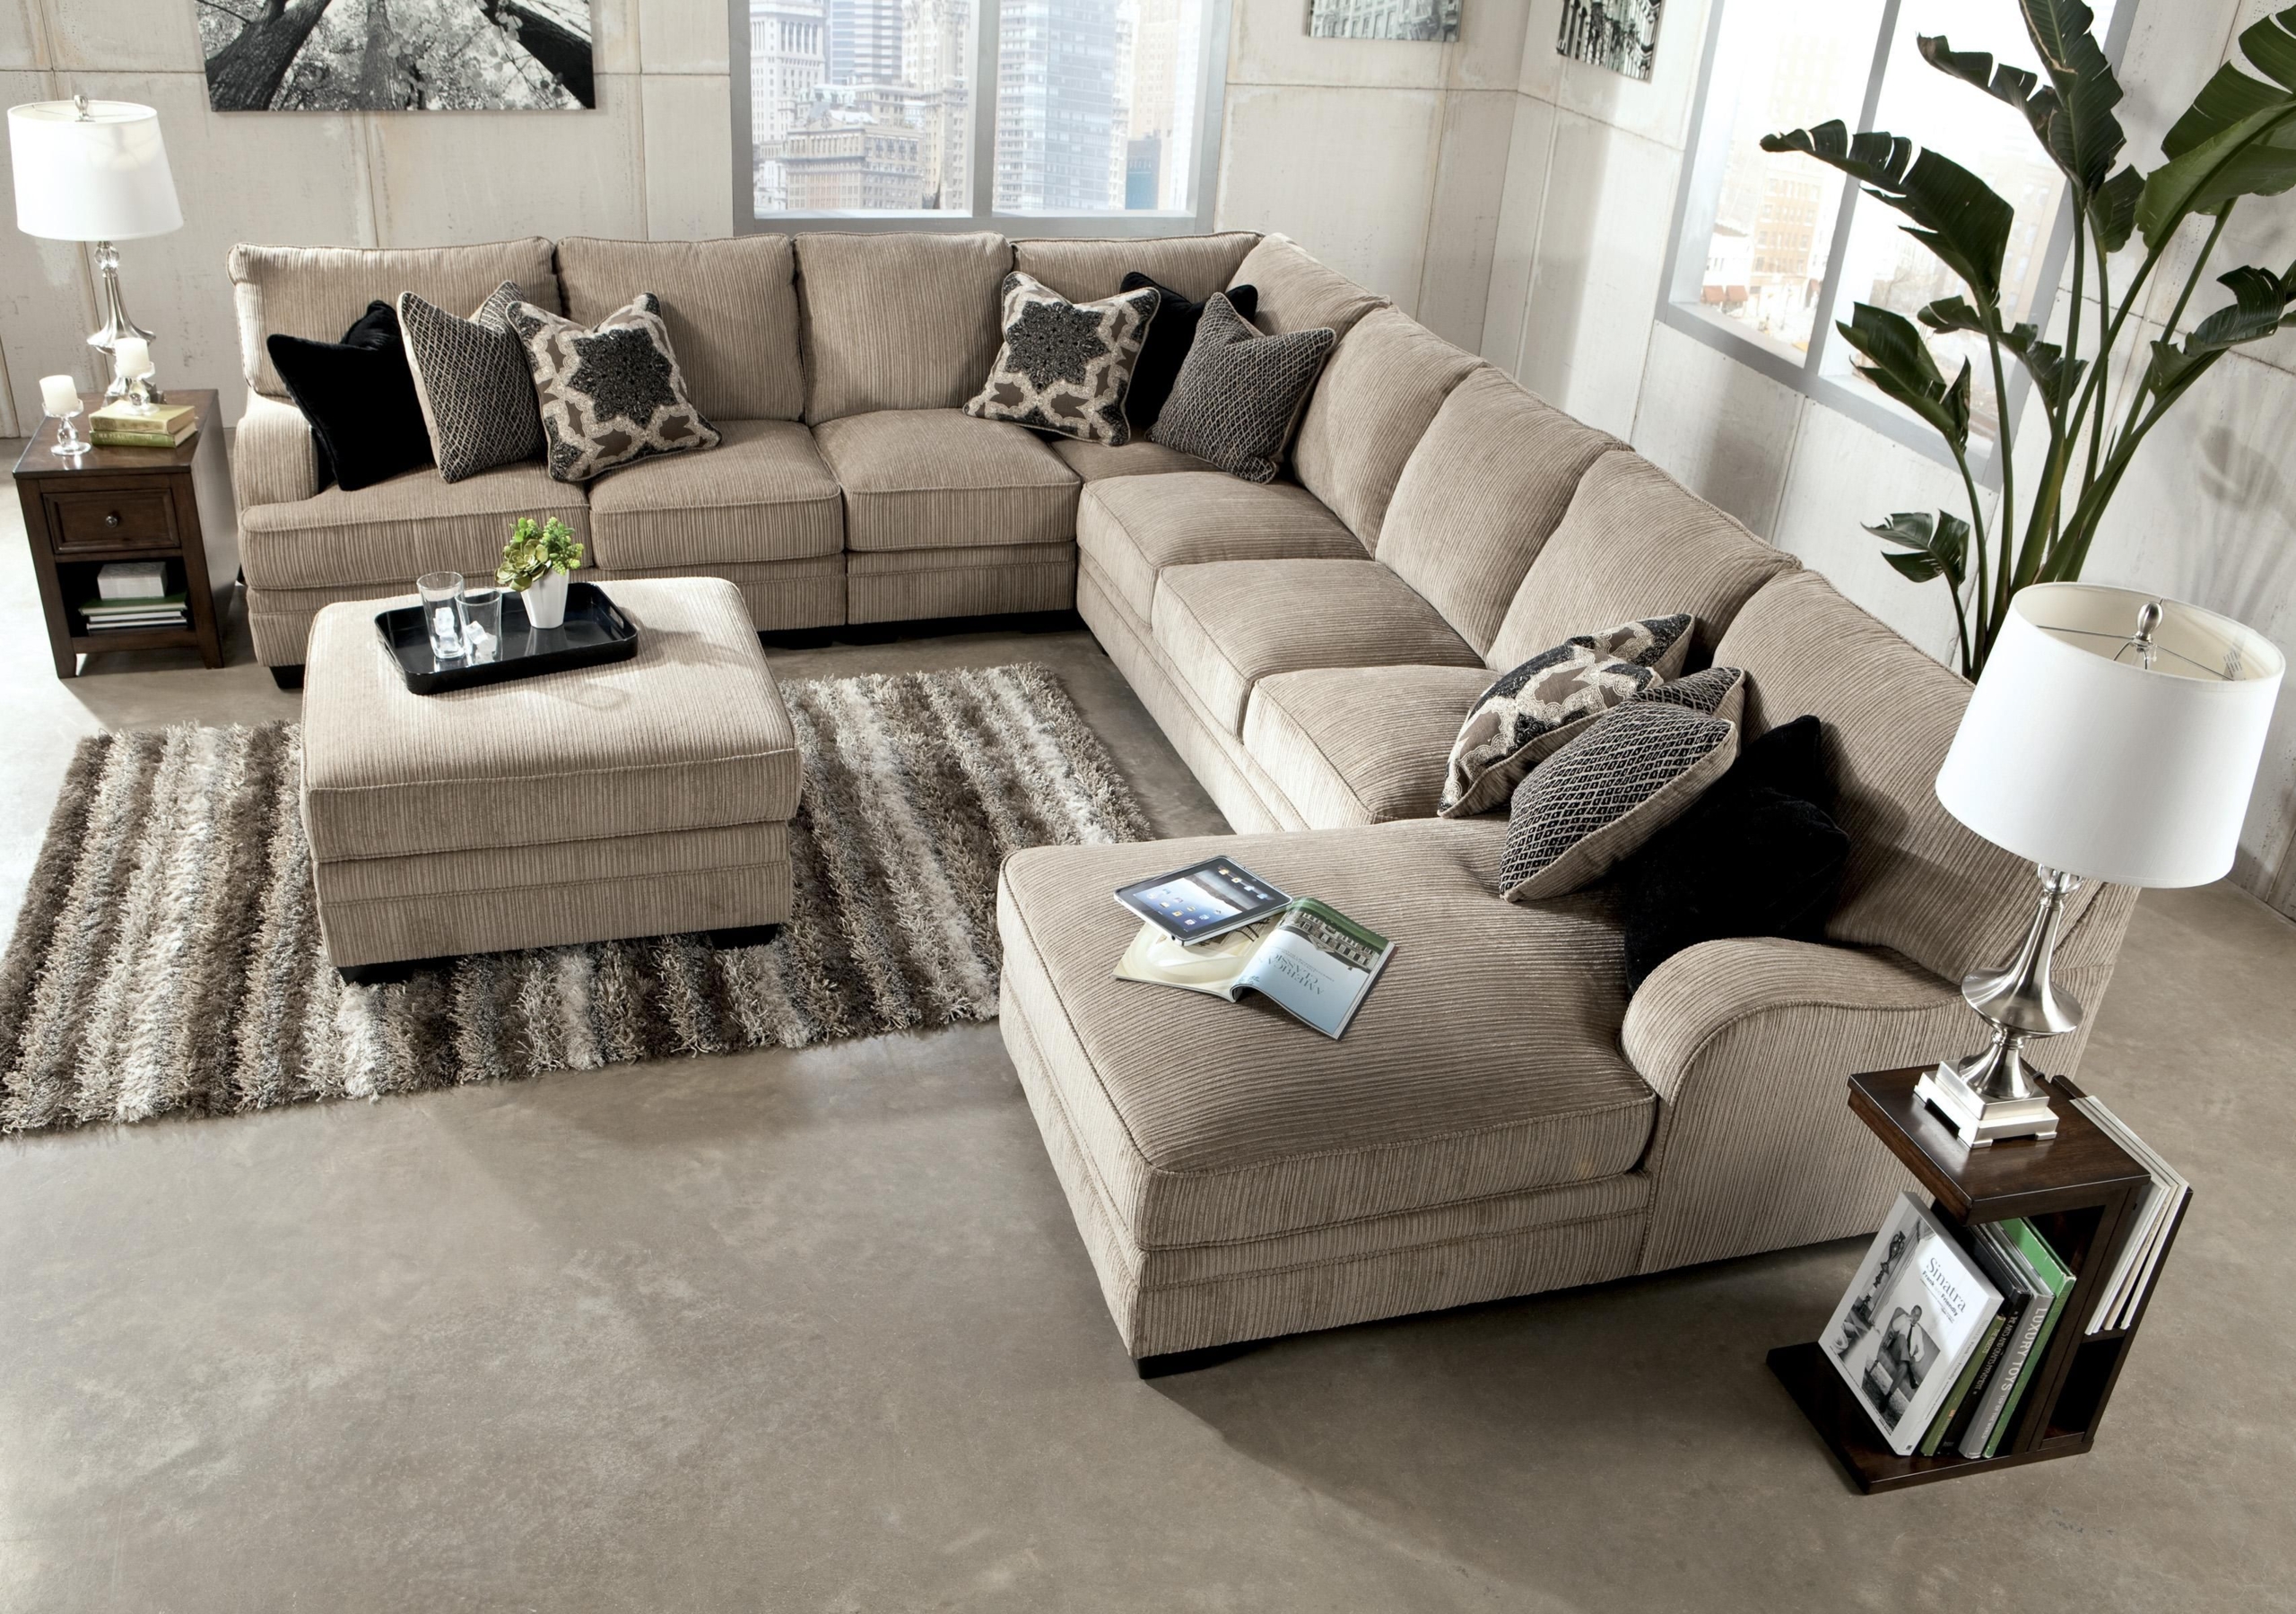 Extra Large Sectional Sofa Visualhunt, Oversized Leather Sectionals